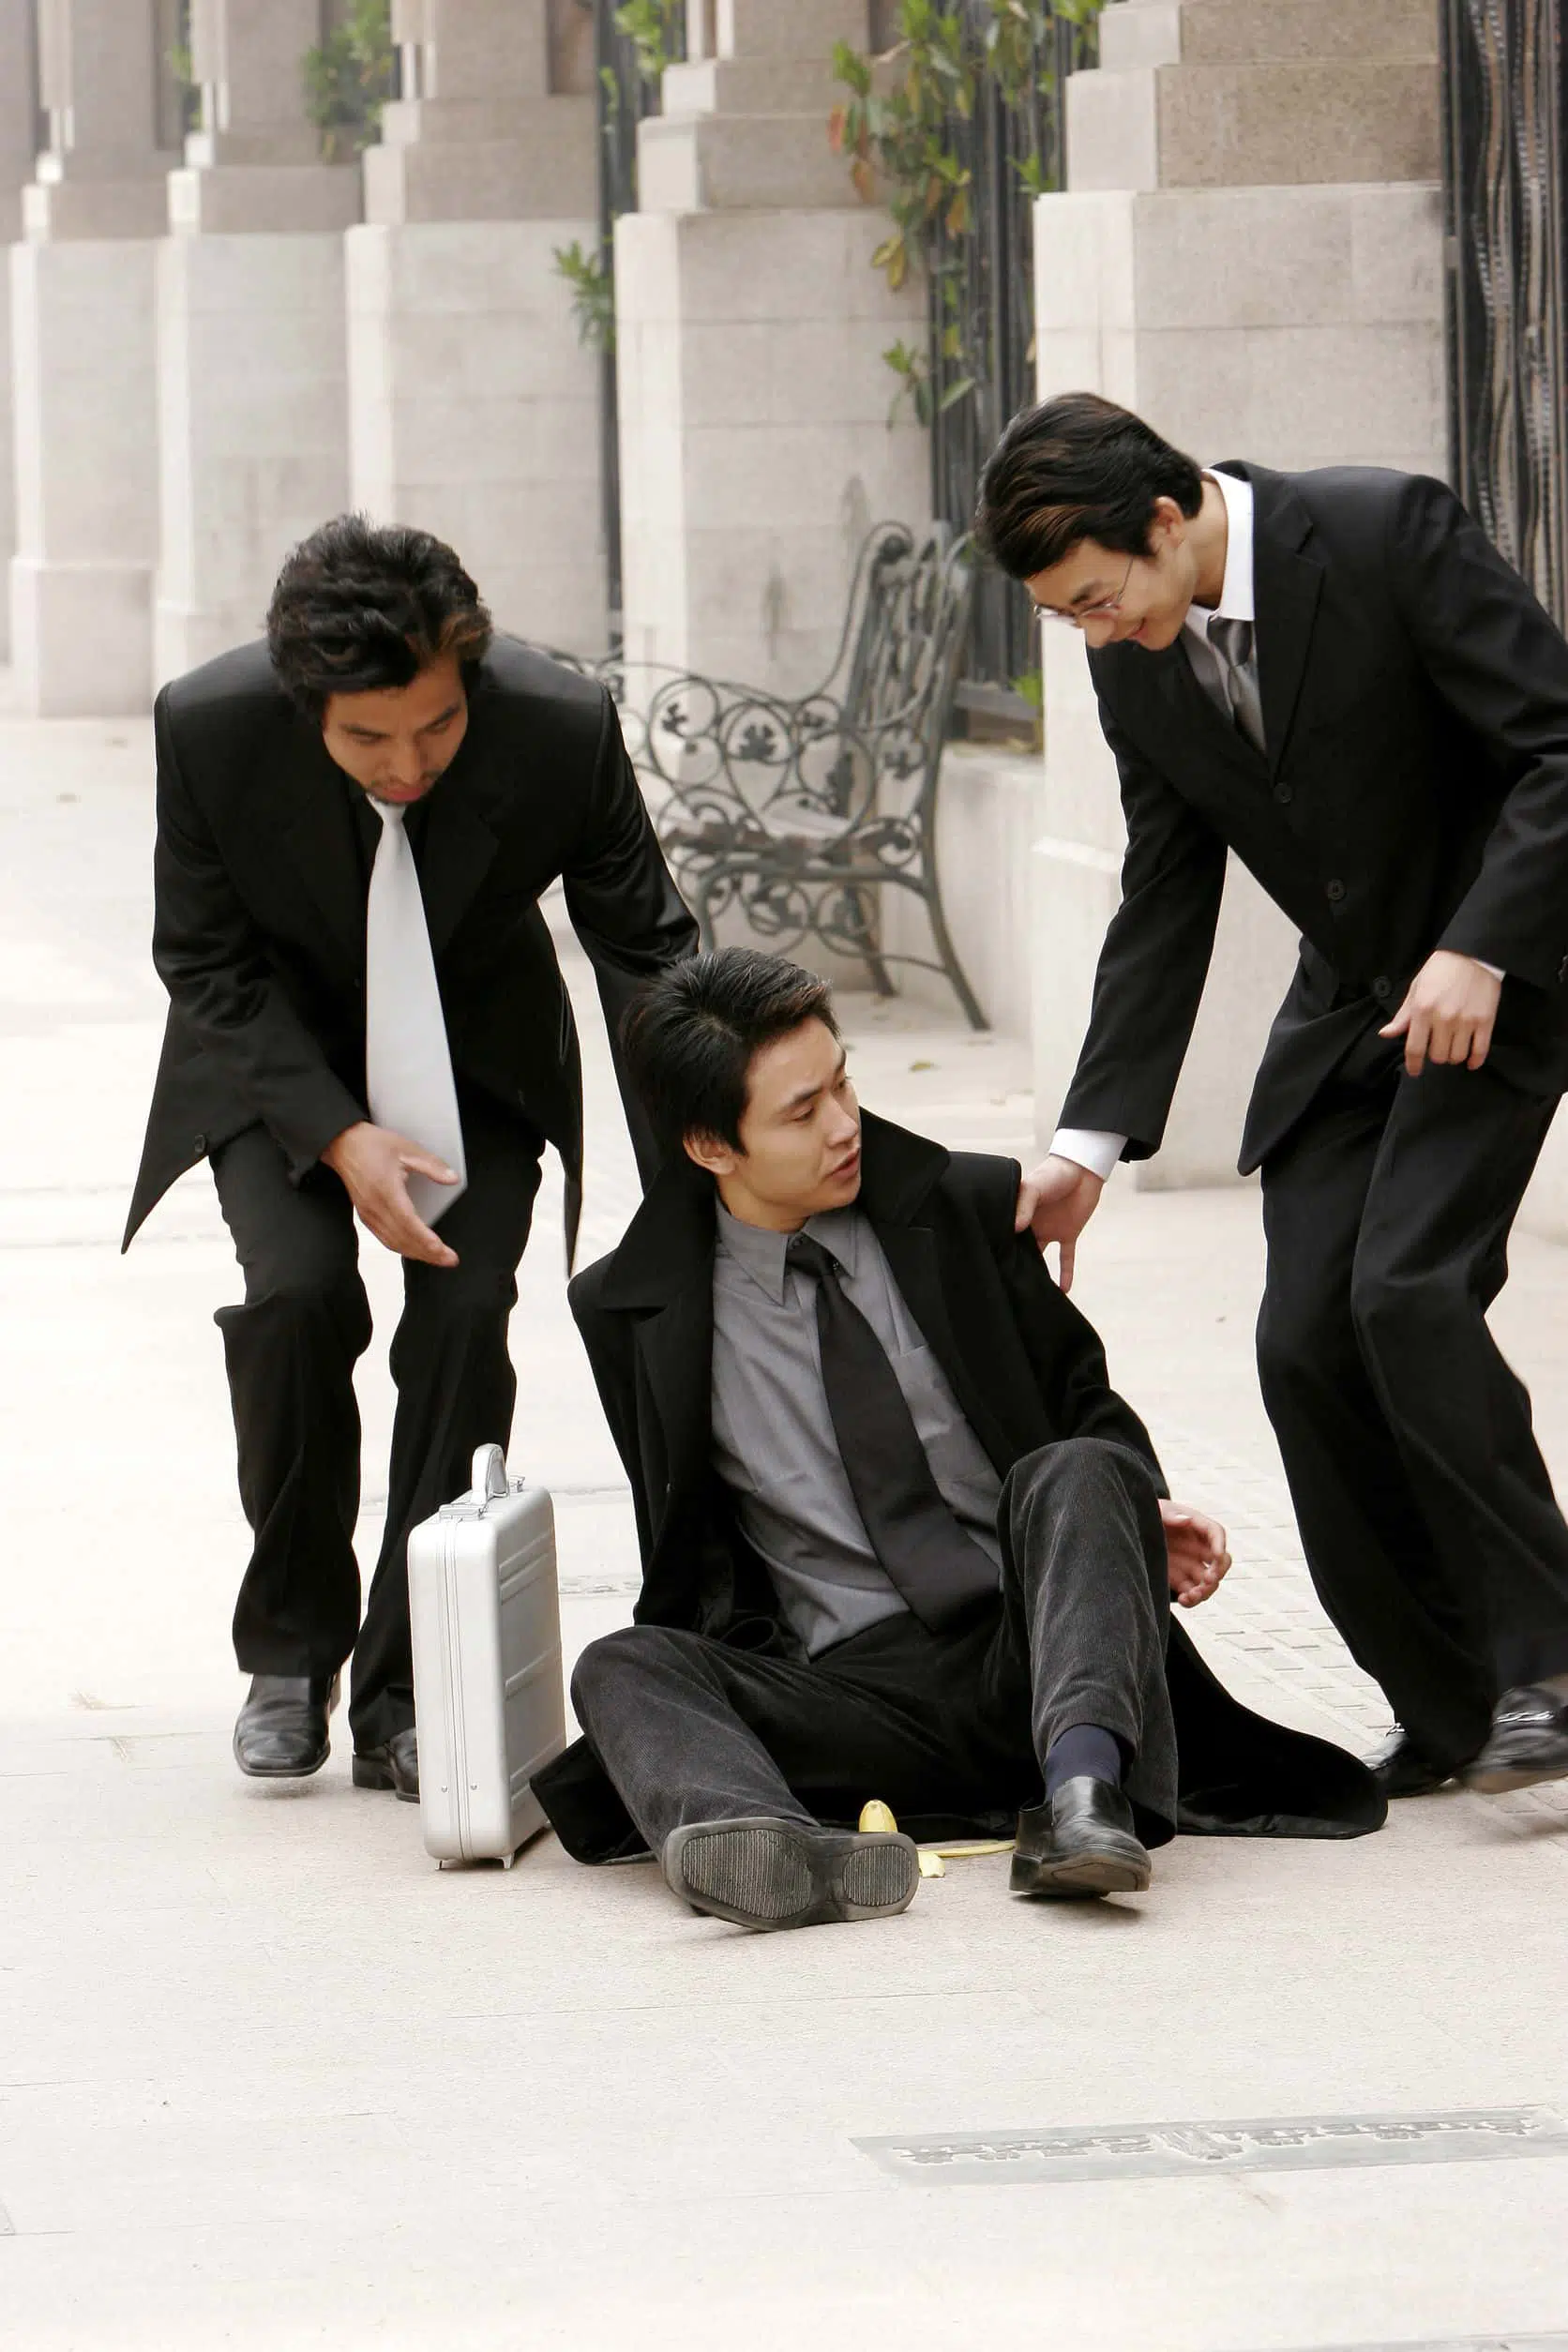 Image of two men helping a third man up after a fall